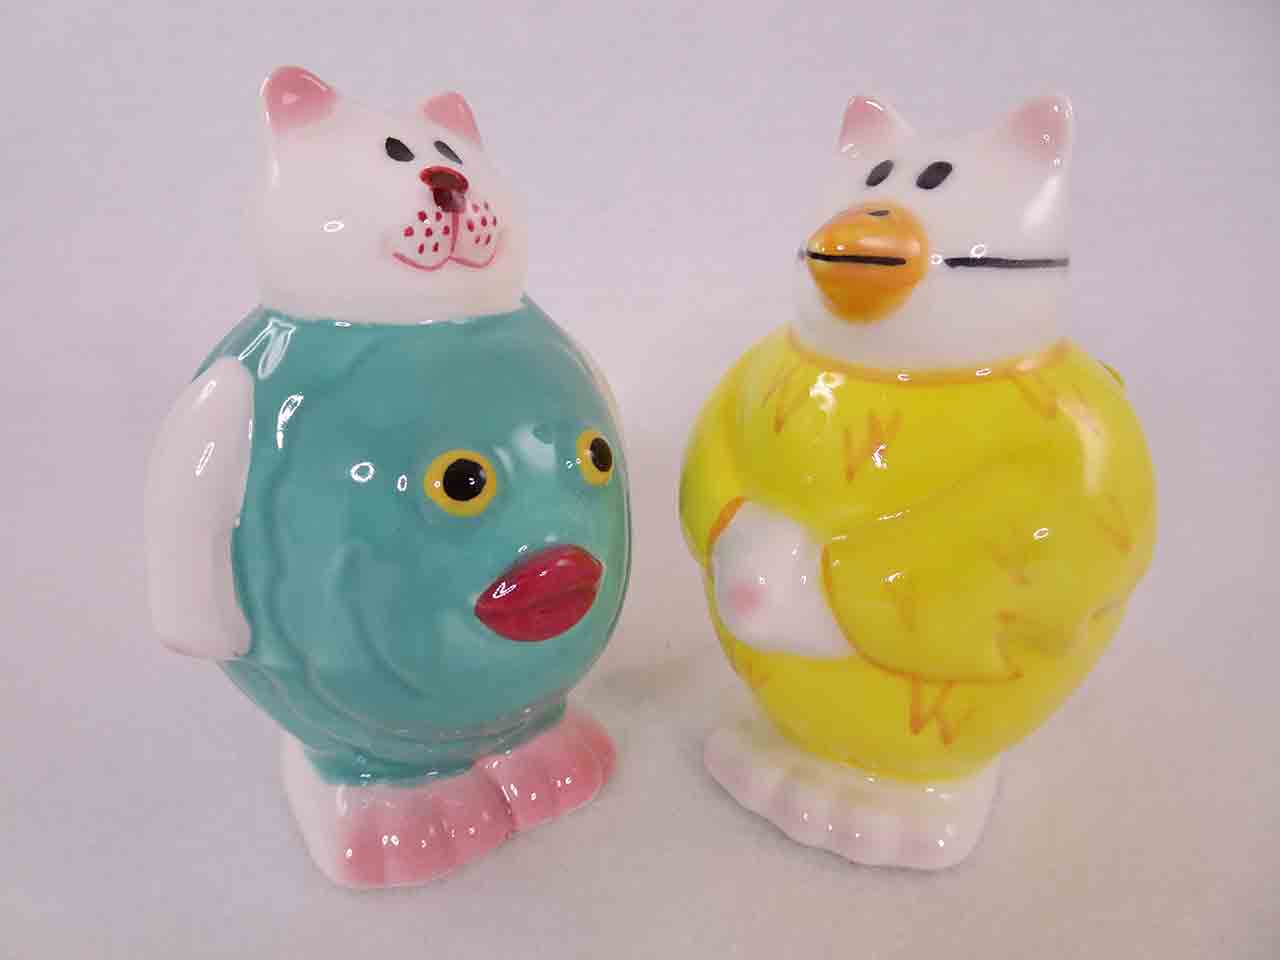 Clay Art Animals in Costumes salt and pepper shakers - cats dressed up as a fish and bird